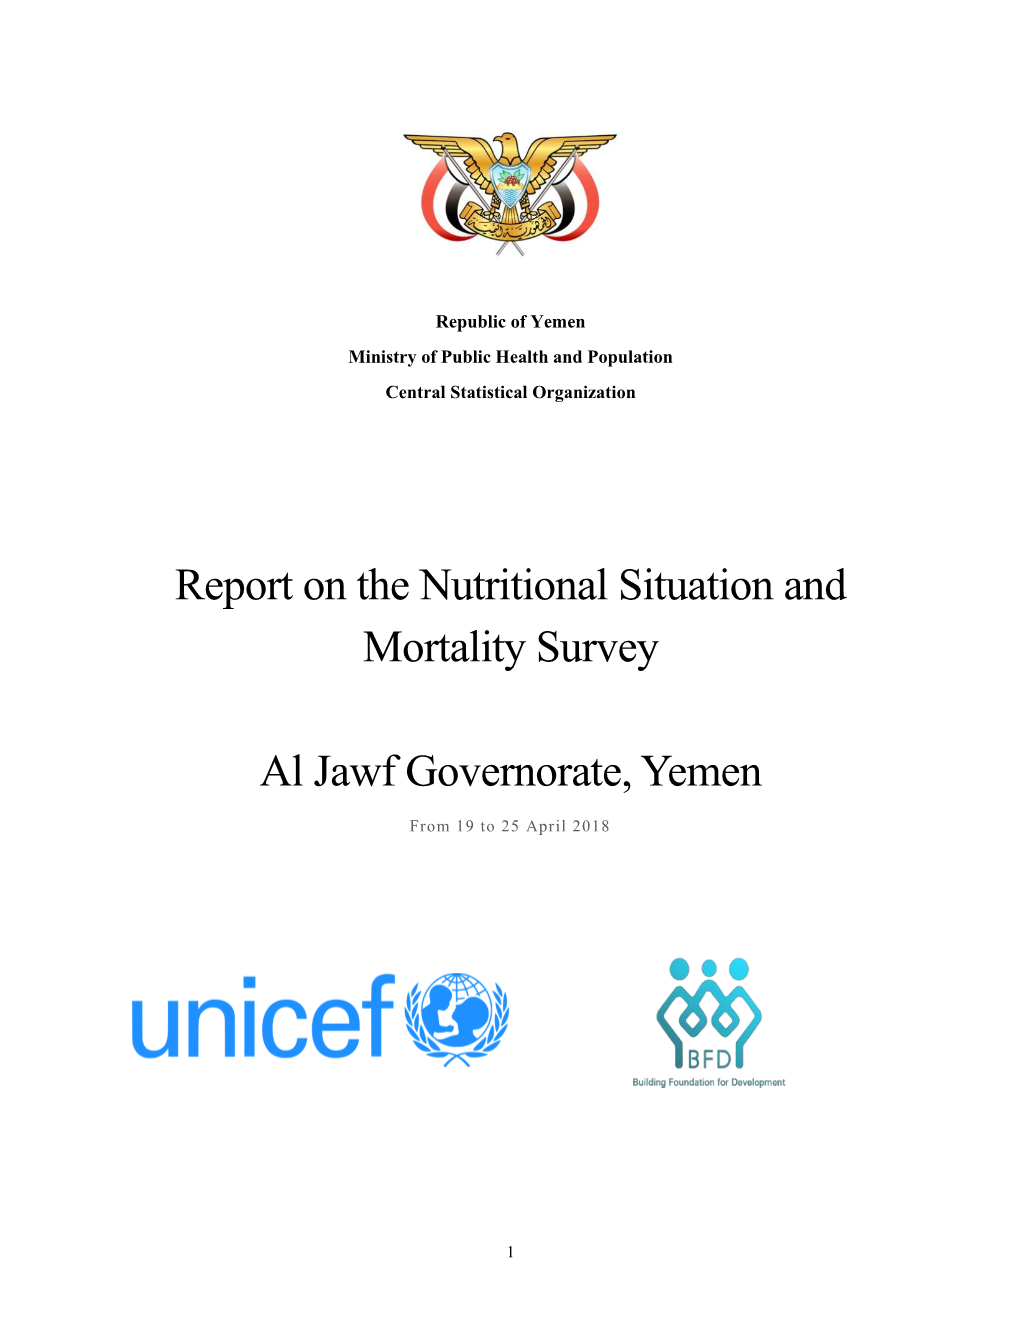 Report on the Nutritional Situation and Mortality Survey Al Jawf